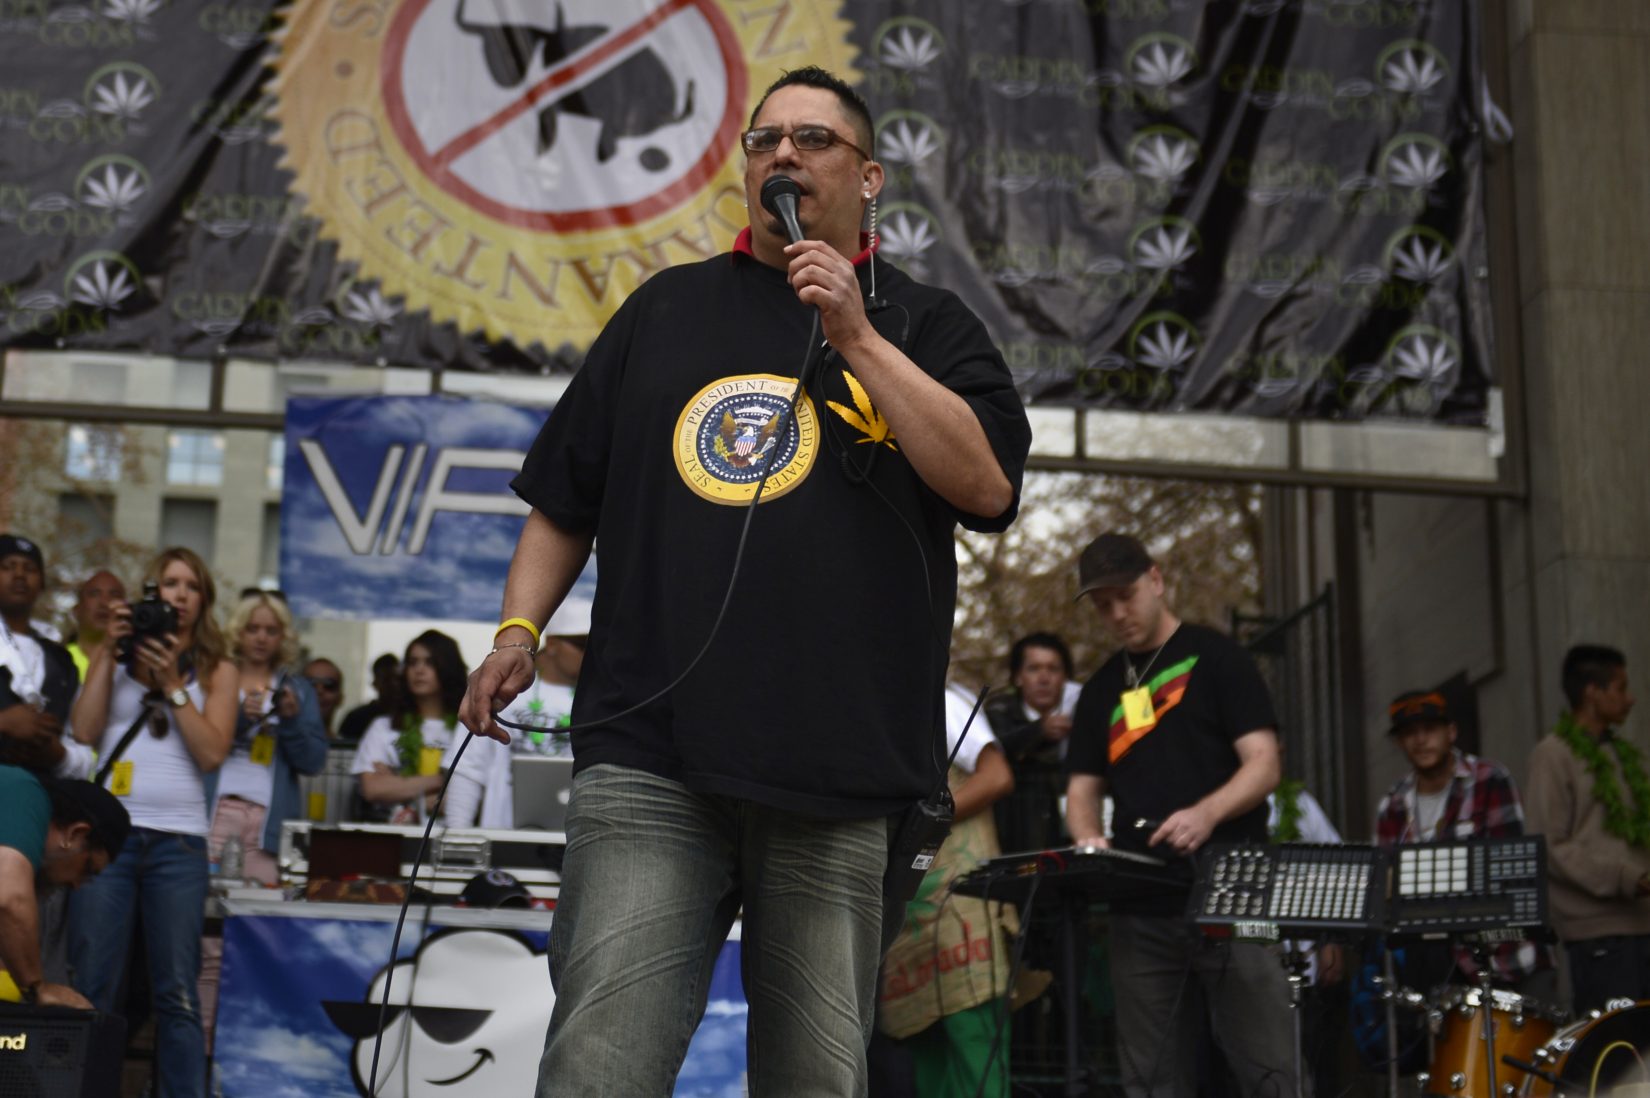 4/20 rally organizer Miguel Lopez spoke during the the event at Civic Center on April 20, 2013.